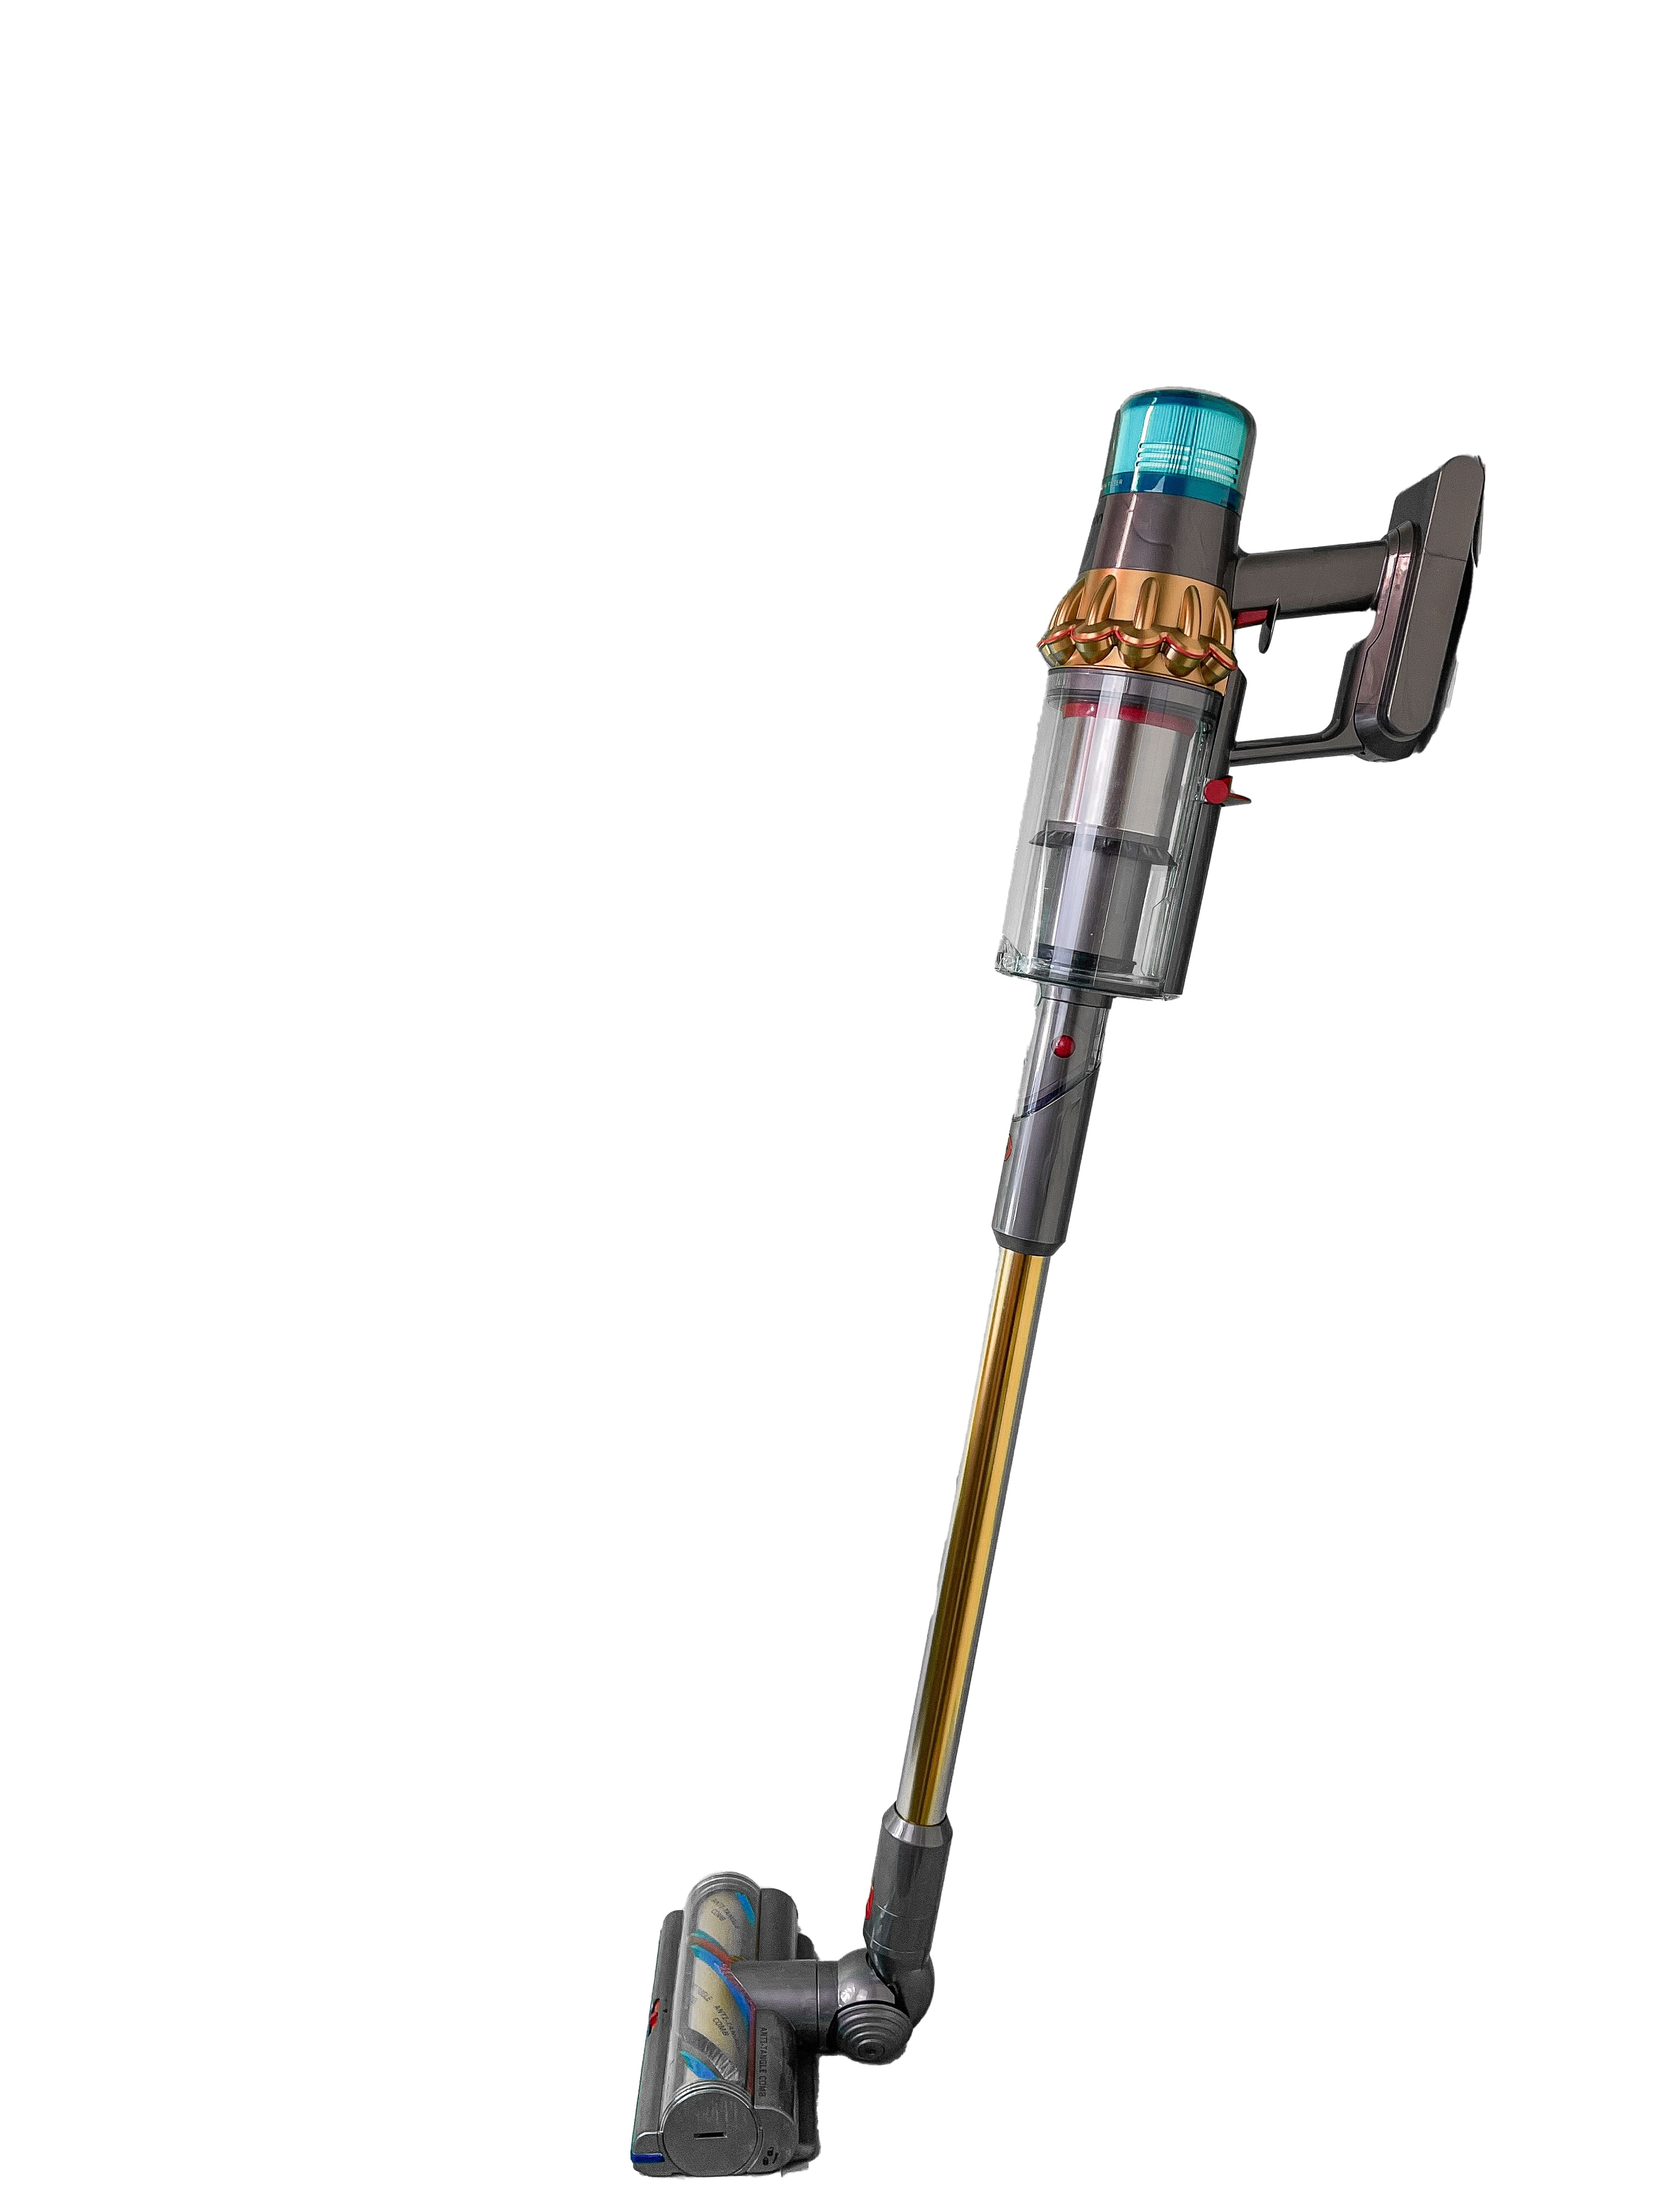 Dyson V15 Detect Absolute Vacuum Cleaner – flitit